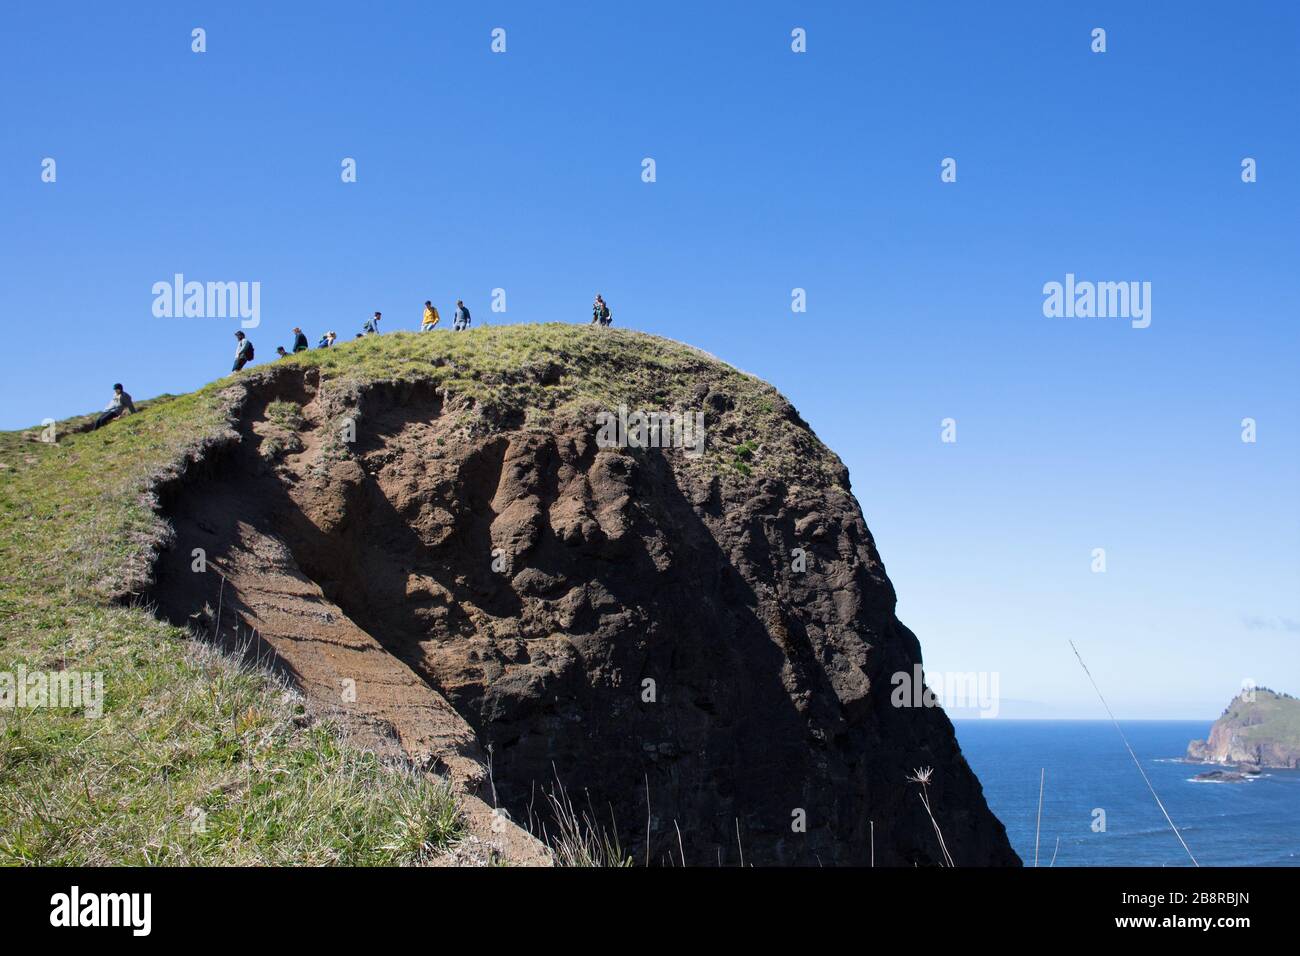 People at the top of God's Thumb, a volcanic plug that is a popular hiking spot in Lincoln City, Oregon, USA. Stock Photo